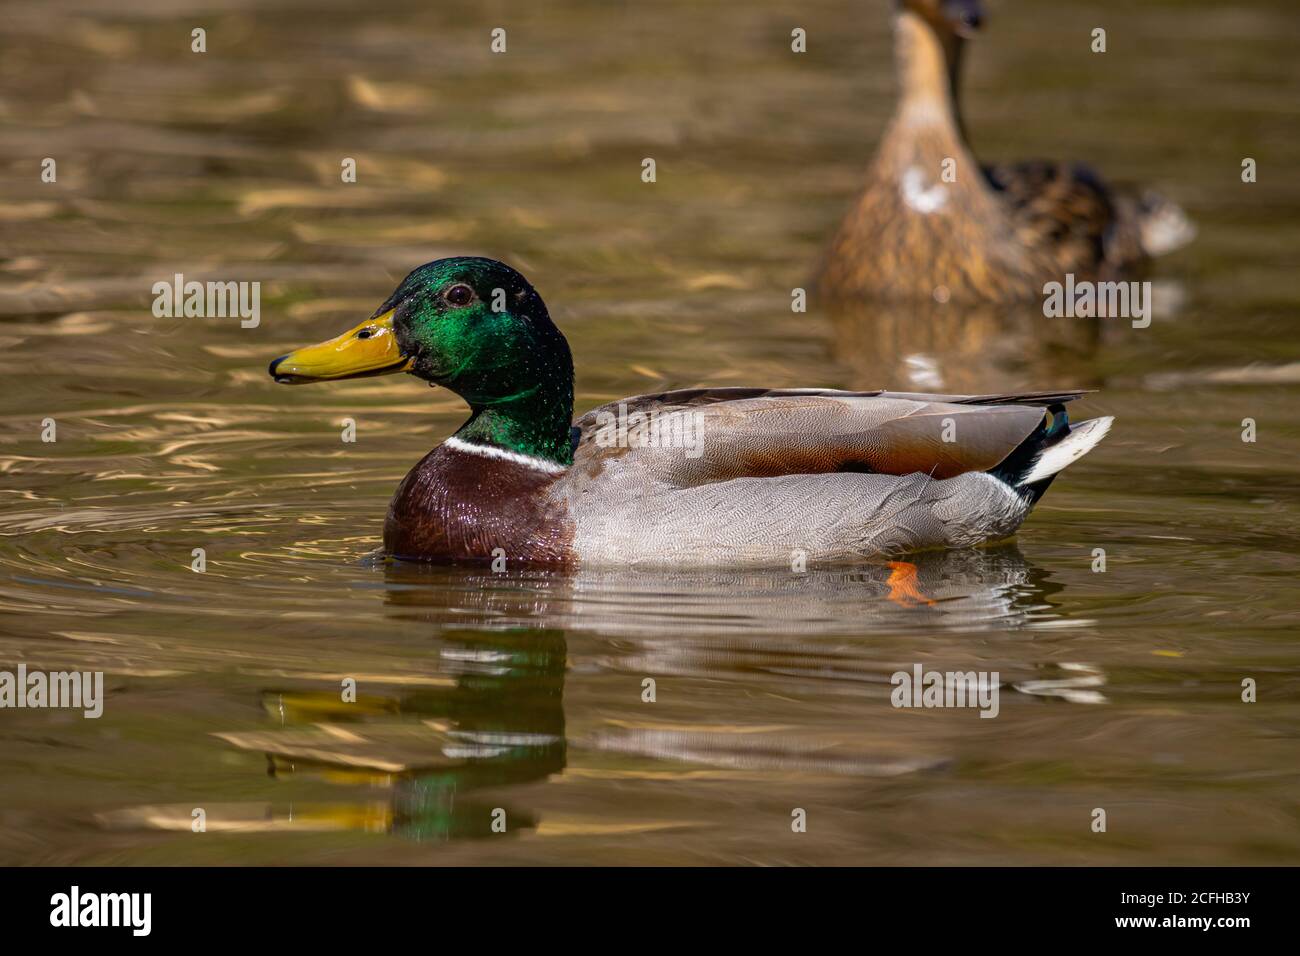 A male and female Mallard duck swimming close to each other. The male up front with focus on him. While the female swims in the background. Stock Photo